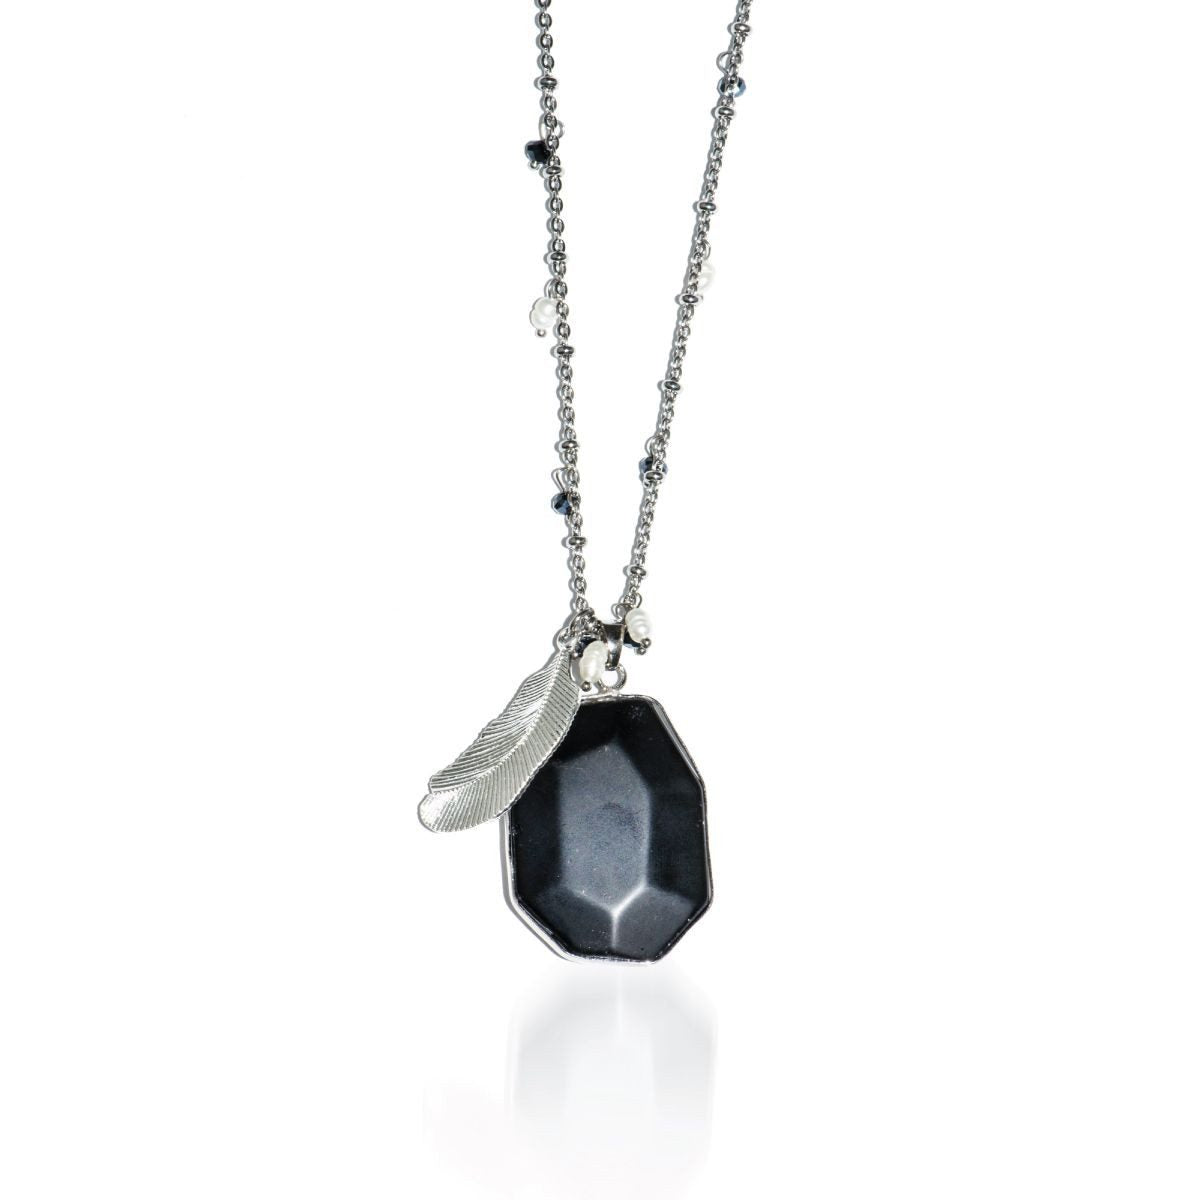 Dark Horse | Matte Black Jade Stone and Gold Feather Charm Pendant Necklace Necklace